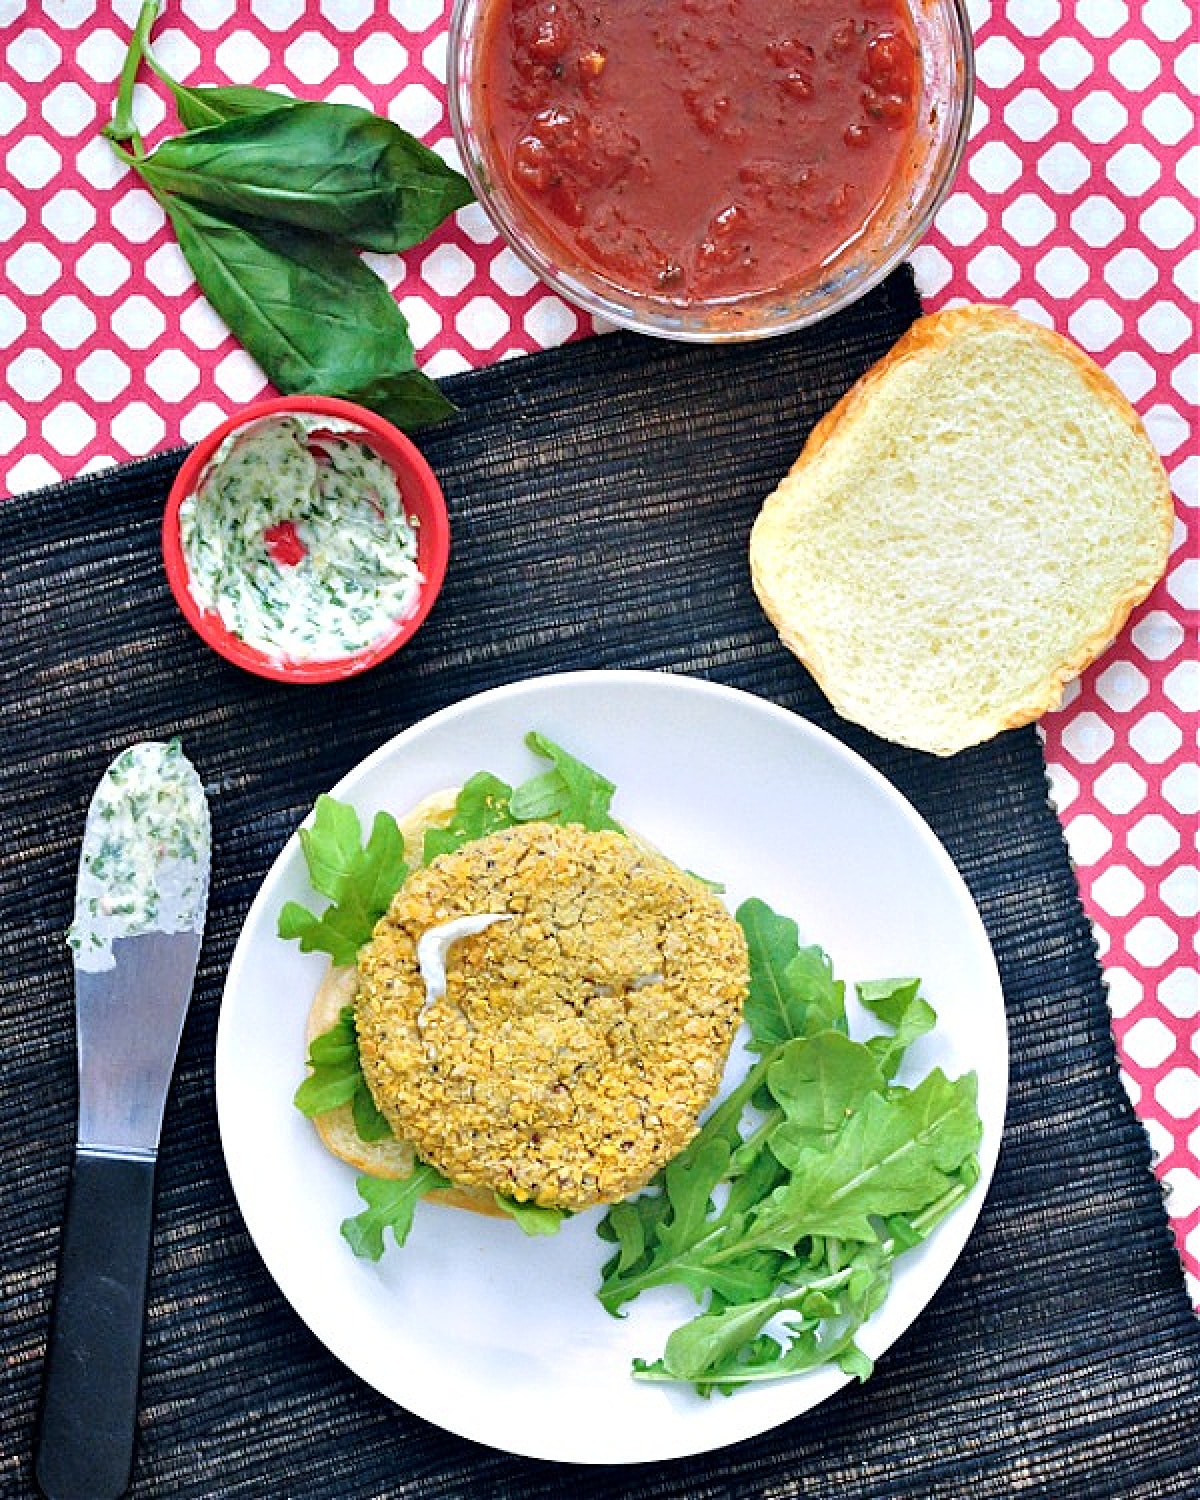 Overhead view of a vegan chicken patty on a bottom bun with arugula, sitting on a white plate. The top bun sits to the side with a basil aioli, a knife with aioli on it, and a small glass bowl of marinara sauce.